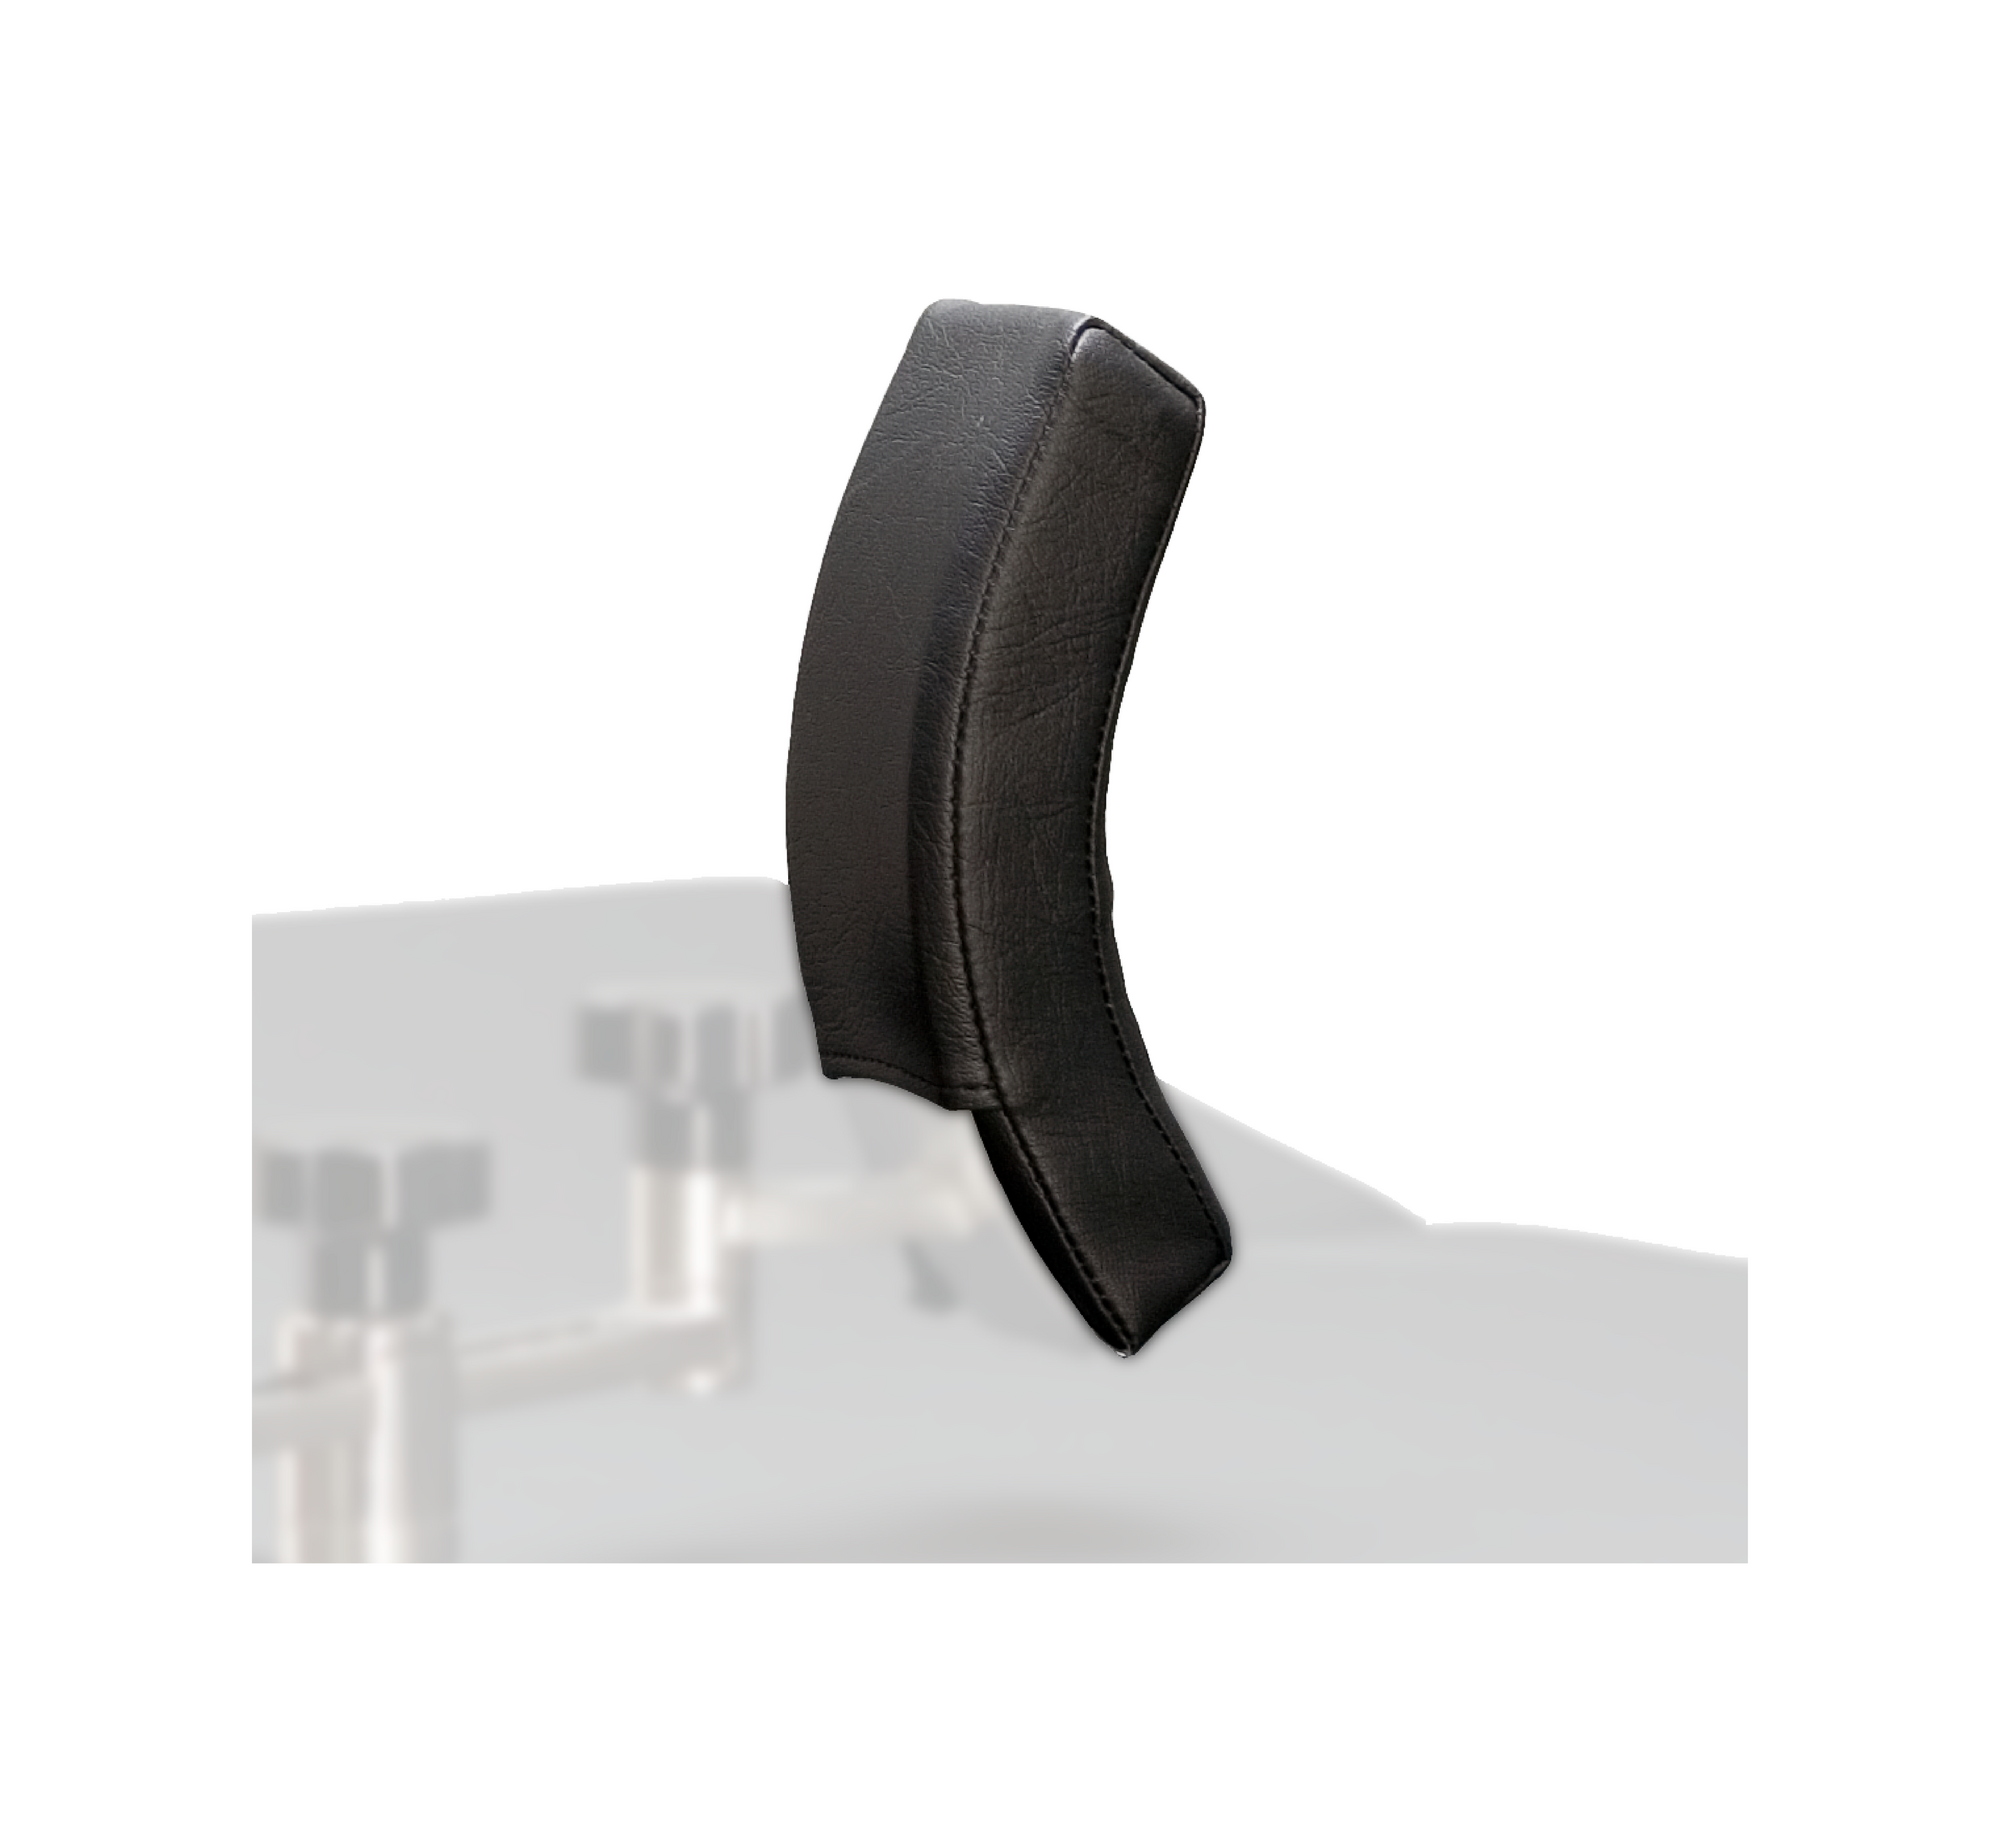 Narrow Rotatable Lateral Support Pad